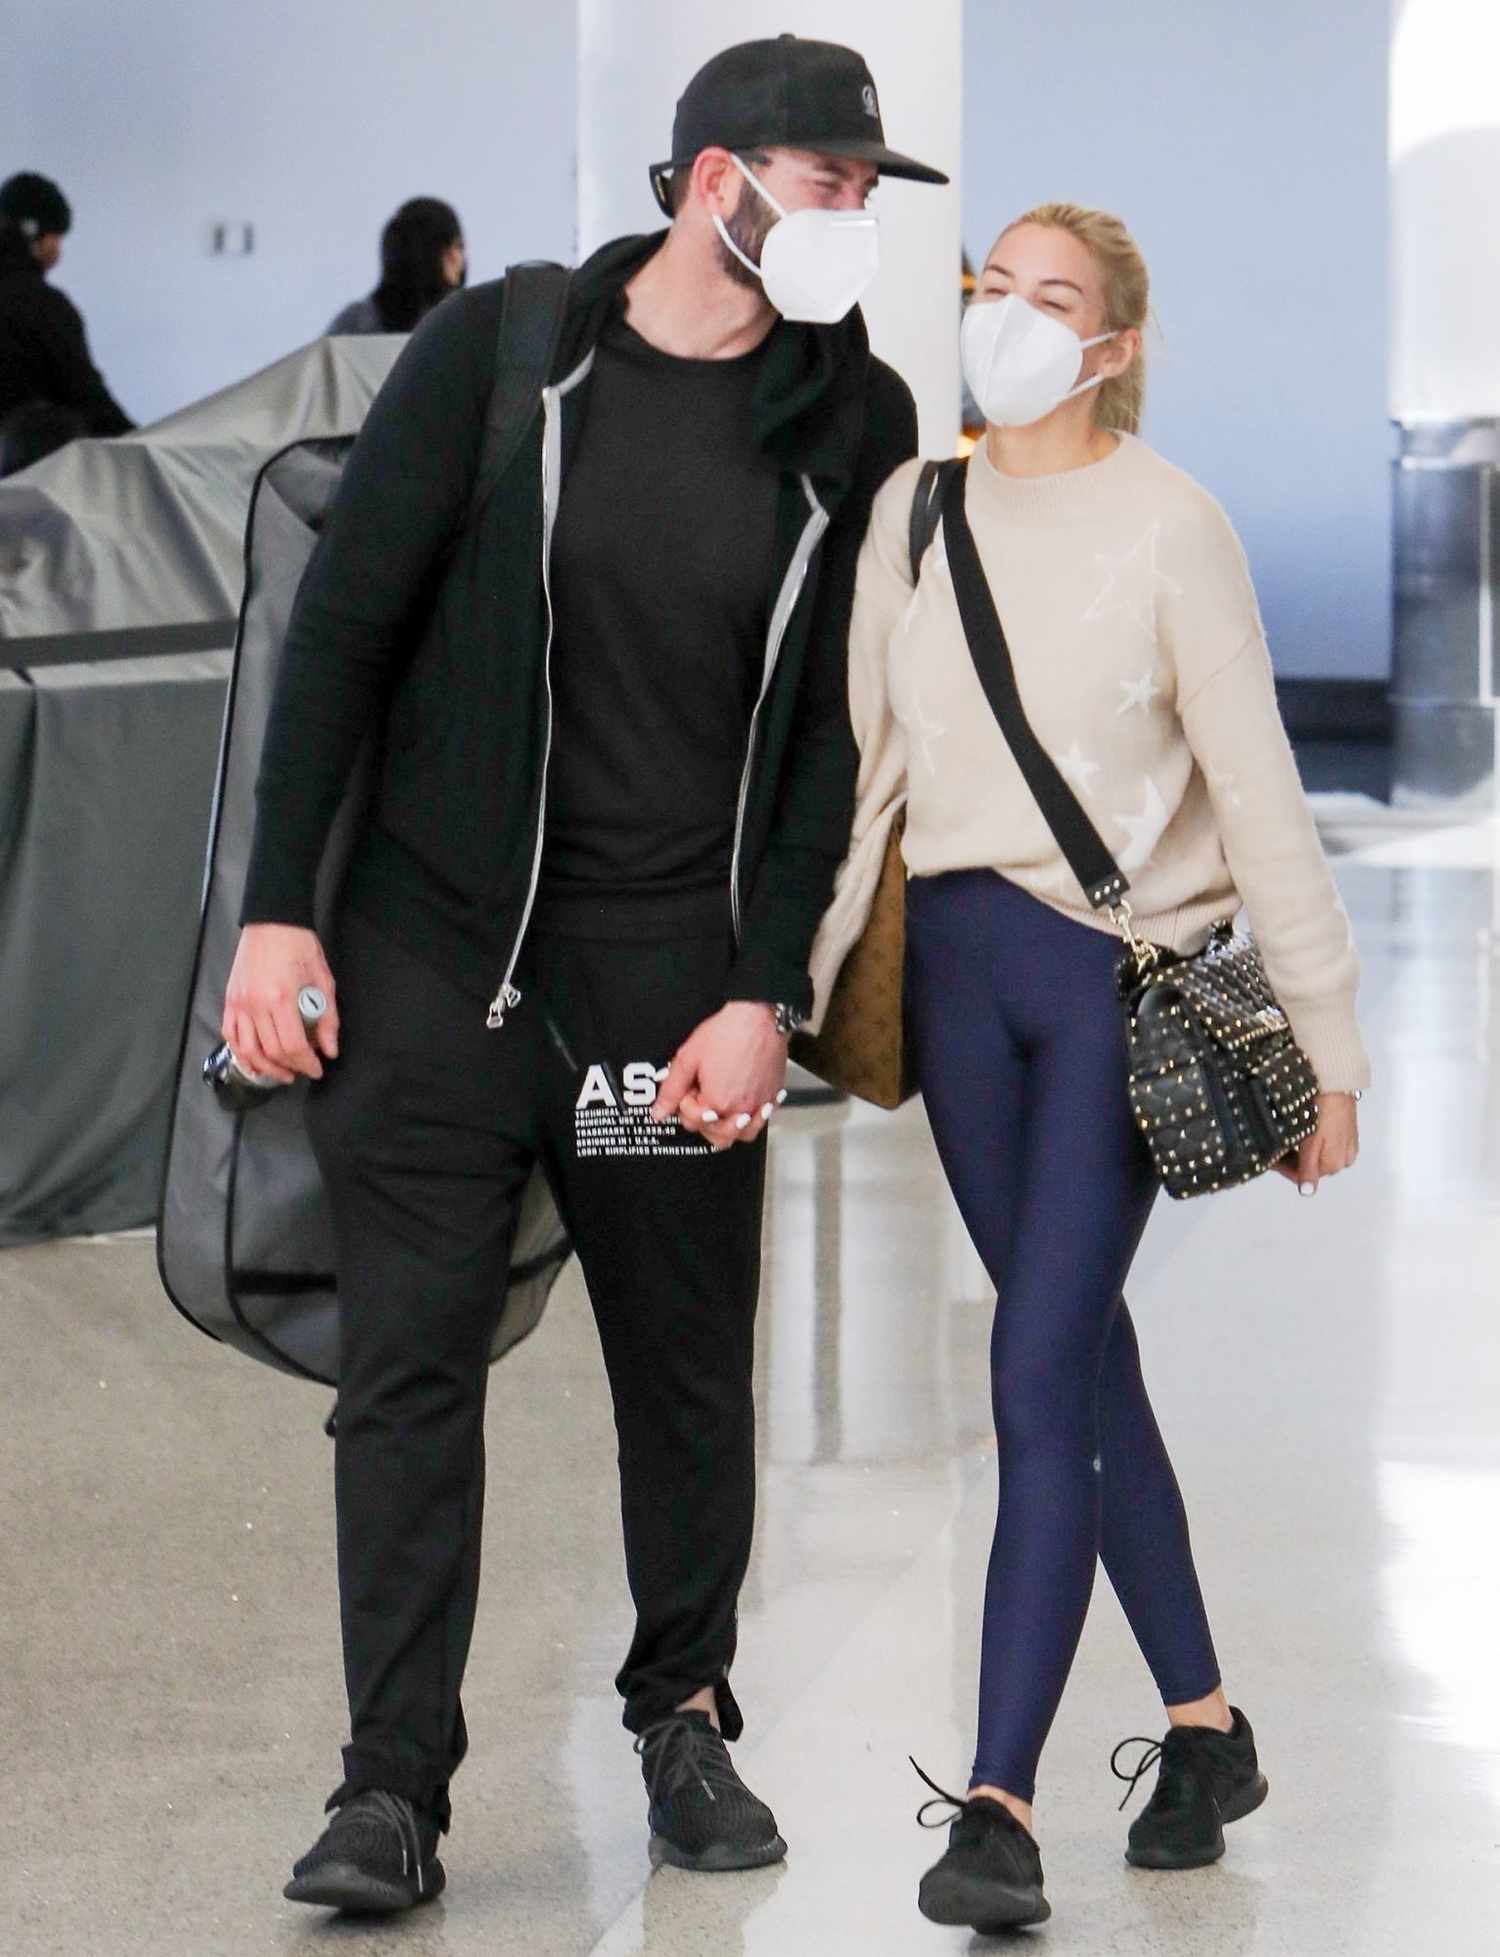 Tarek El Moussa and fianc&eacute; Heather Rae Young arrive at LAX